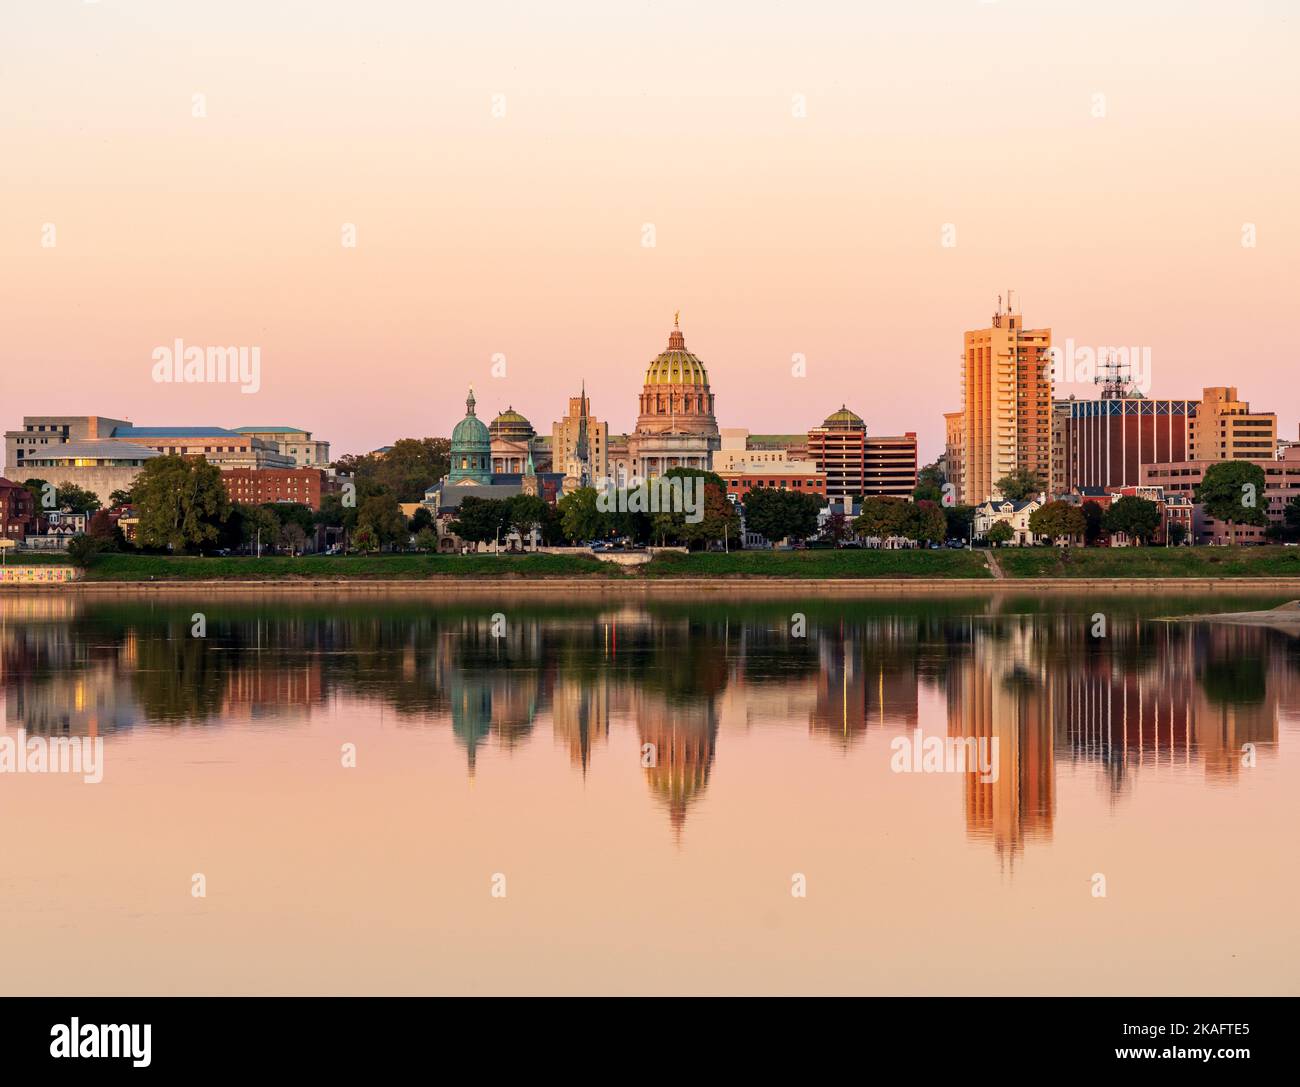 State capitol in cityscape of Harrisburg in Pennsylvania Stock Photo